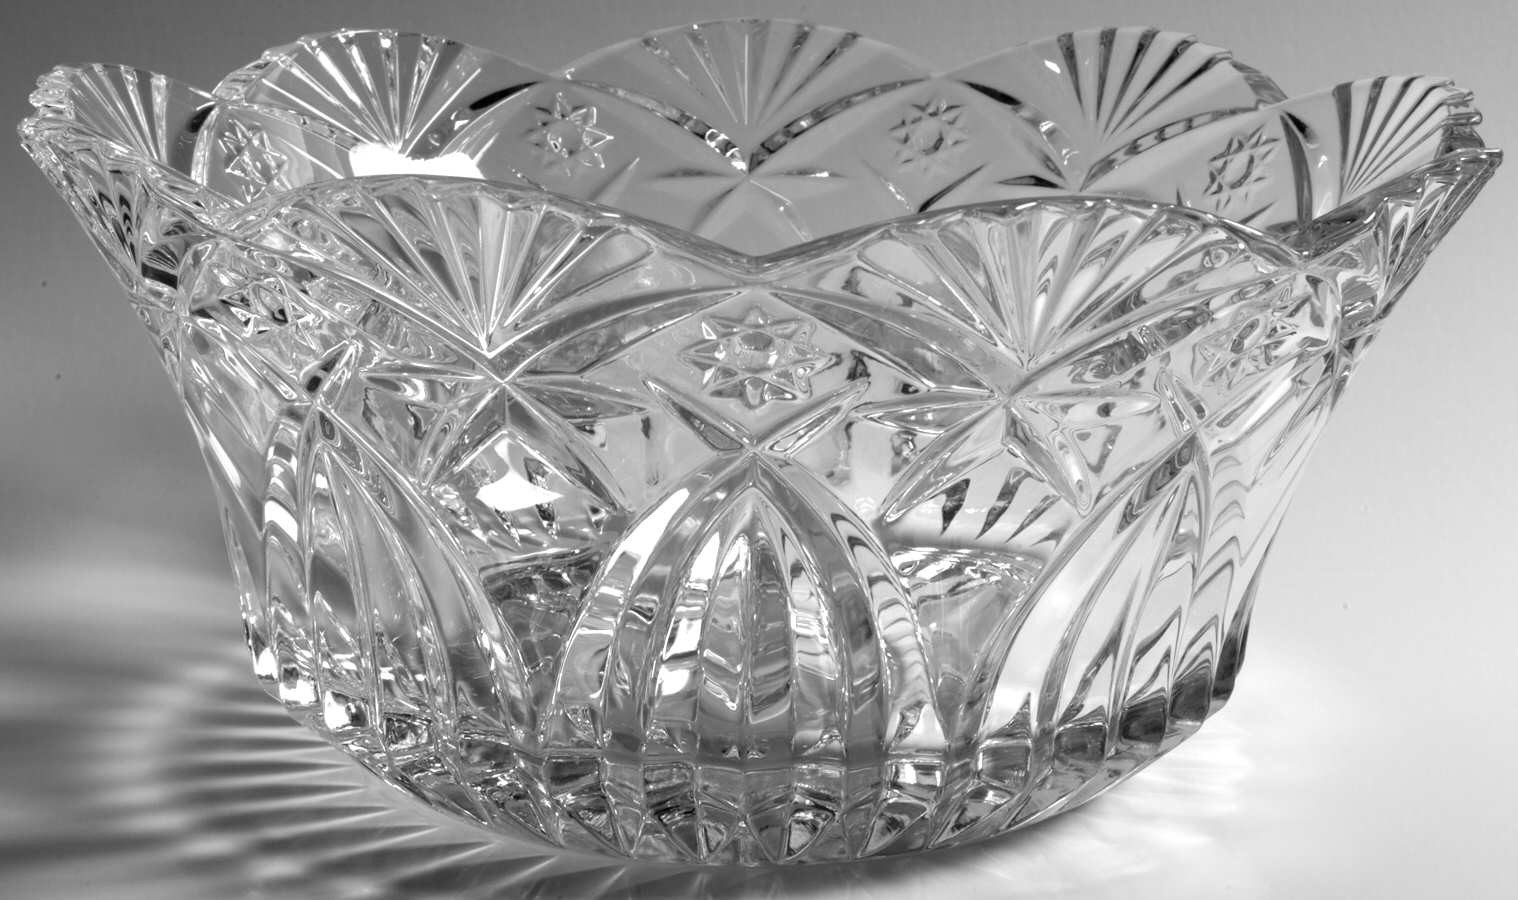 21 Awesome Cristal D Arques Vase 2024 free download cristal d arques vase of vincennes 11 round bowl by cristal darques durand replacements ltd intended for 11 round bowl vincennes by cristal darques durand